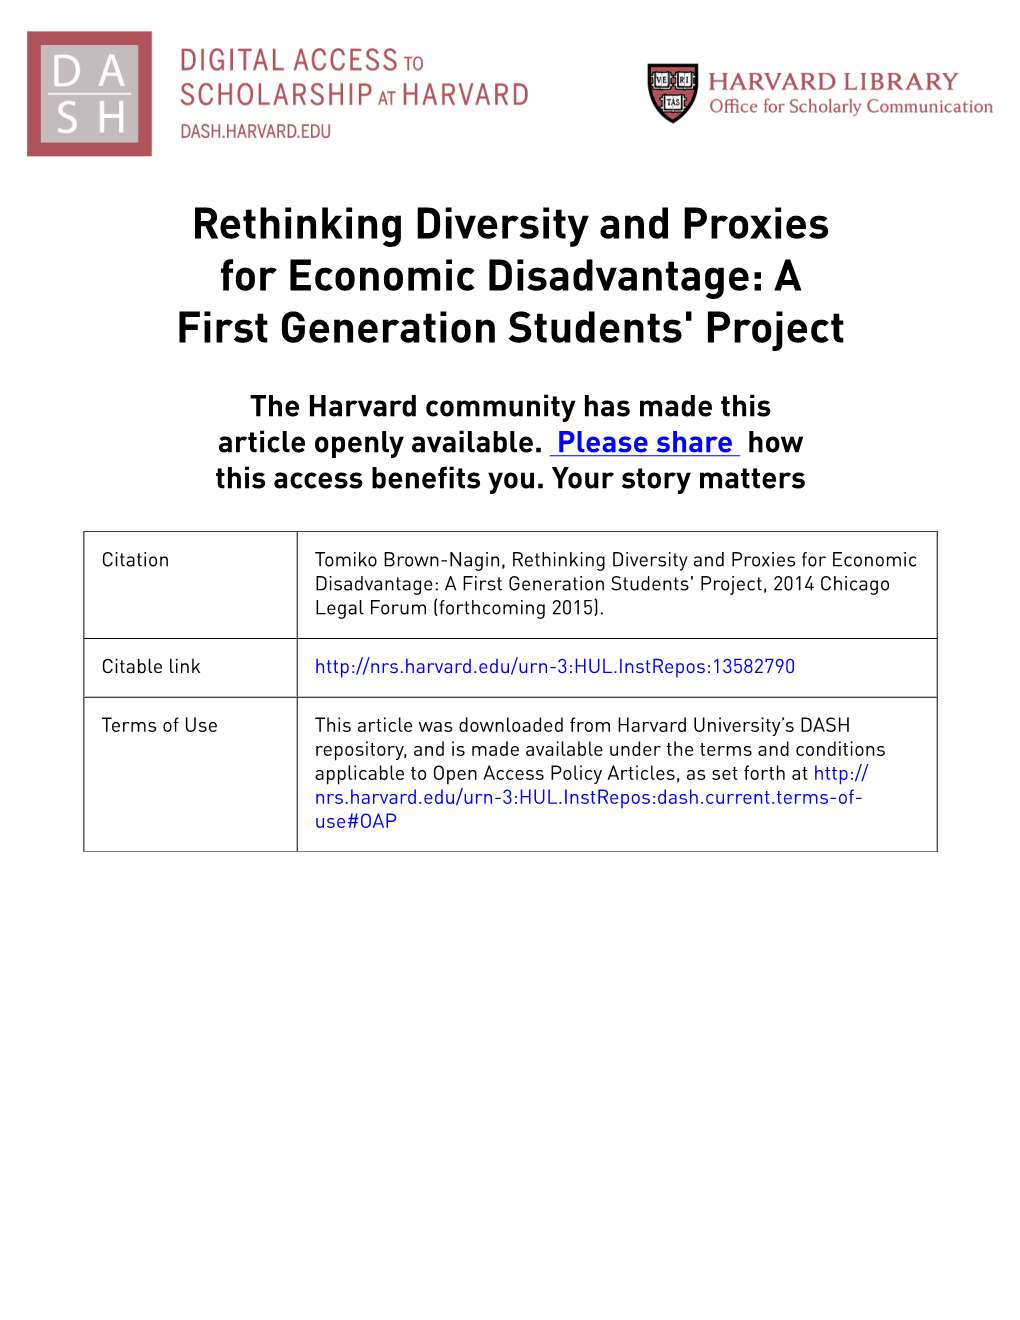 Rethinking Diversity and Proxies for Economic Disadvantage: a First Generation Students' Project